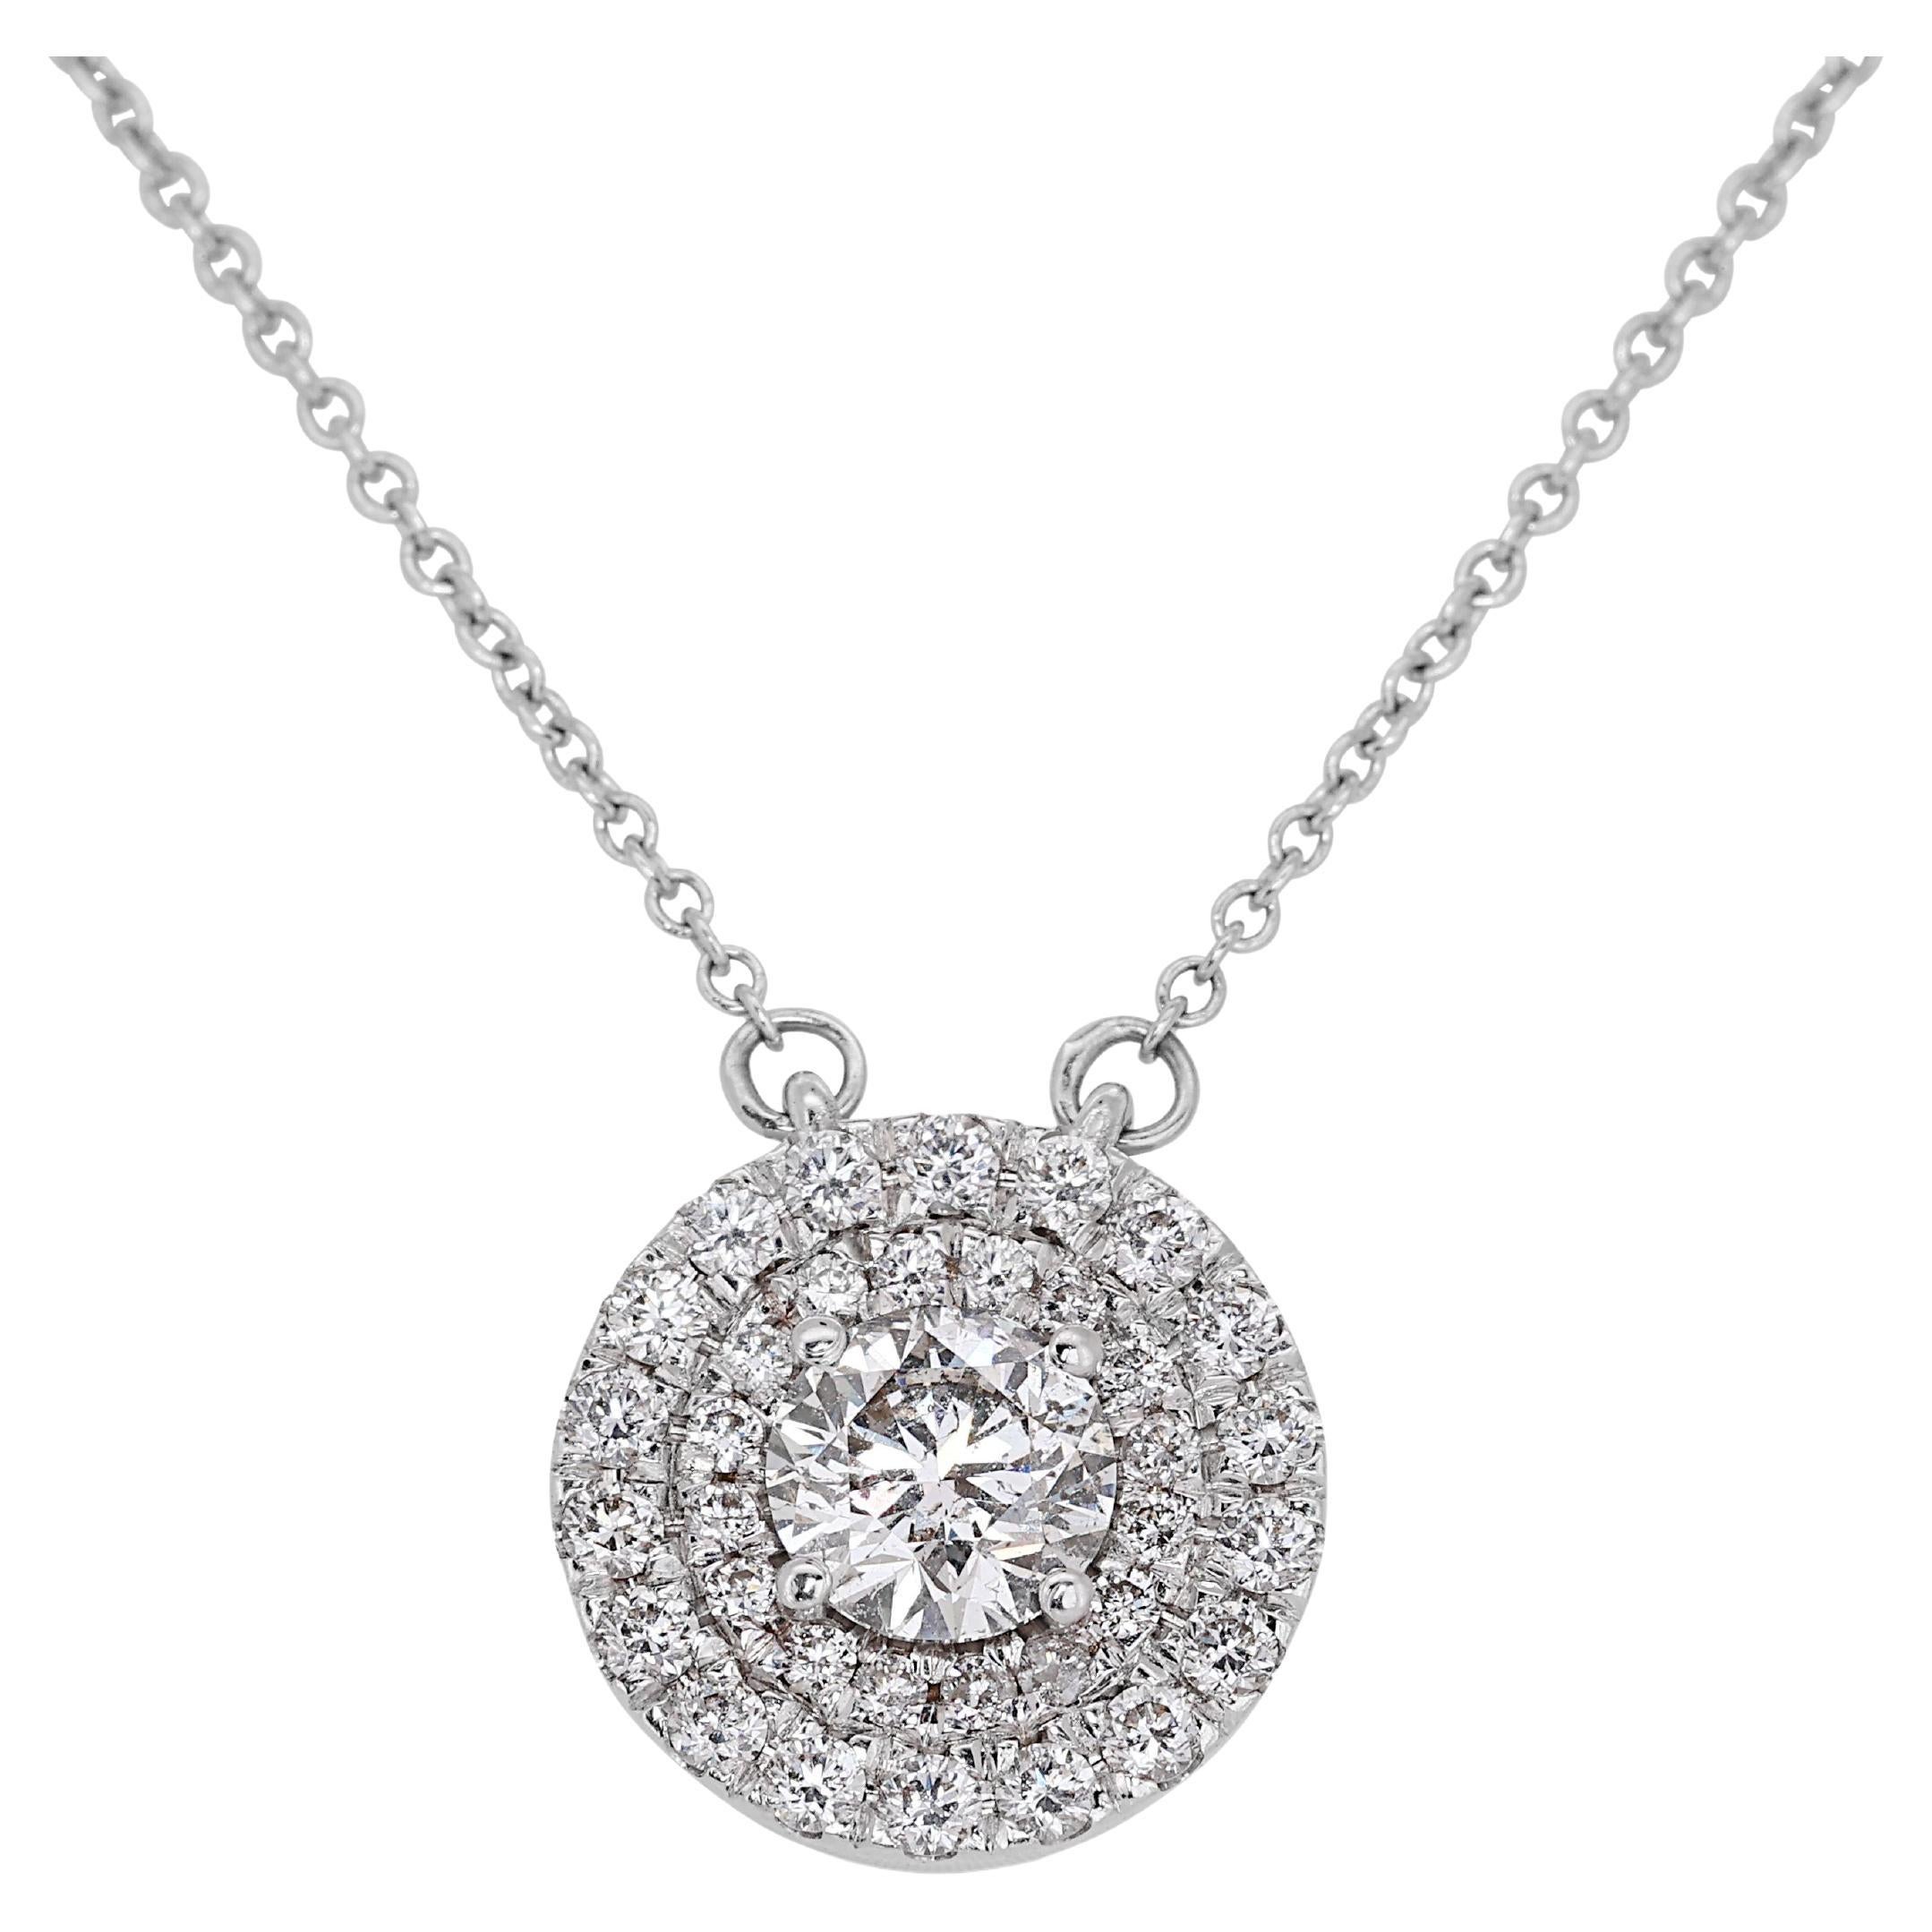 Gorgeous 14k White Gold Double Halo Necklace with 1.17 Carat Natural Diamonds